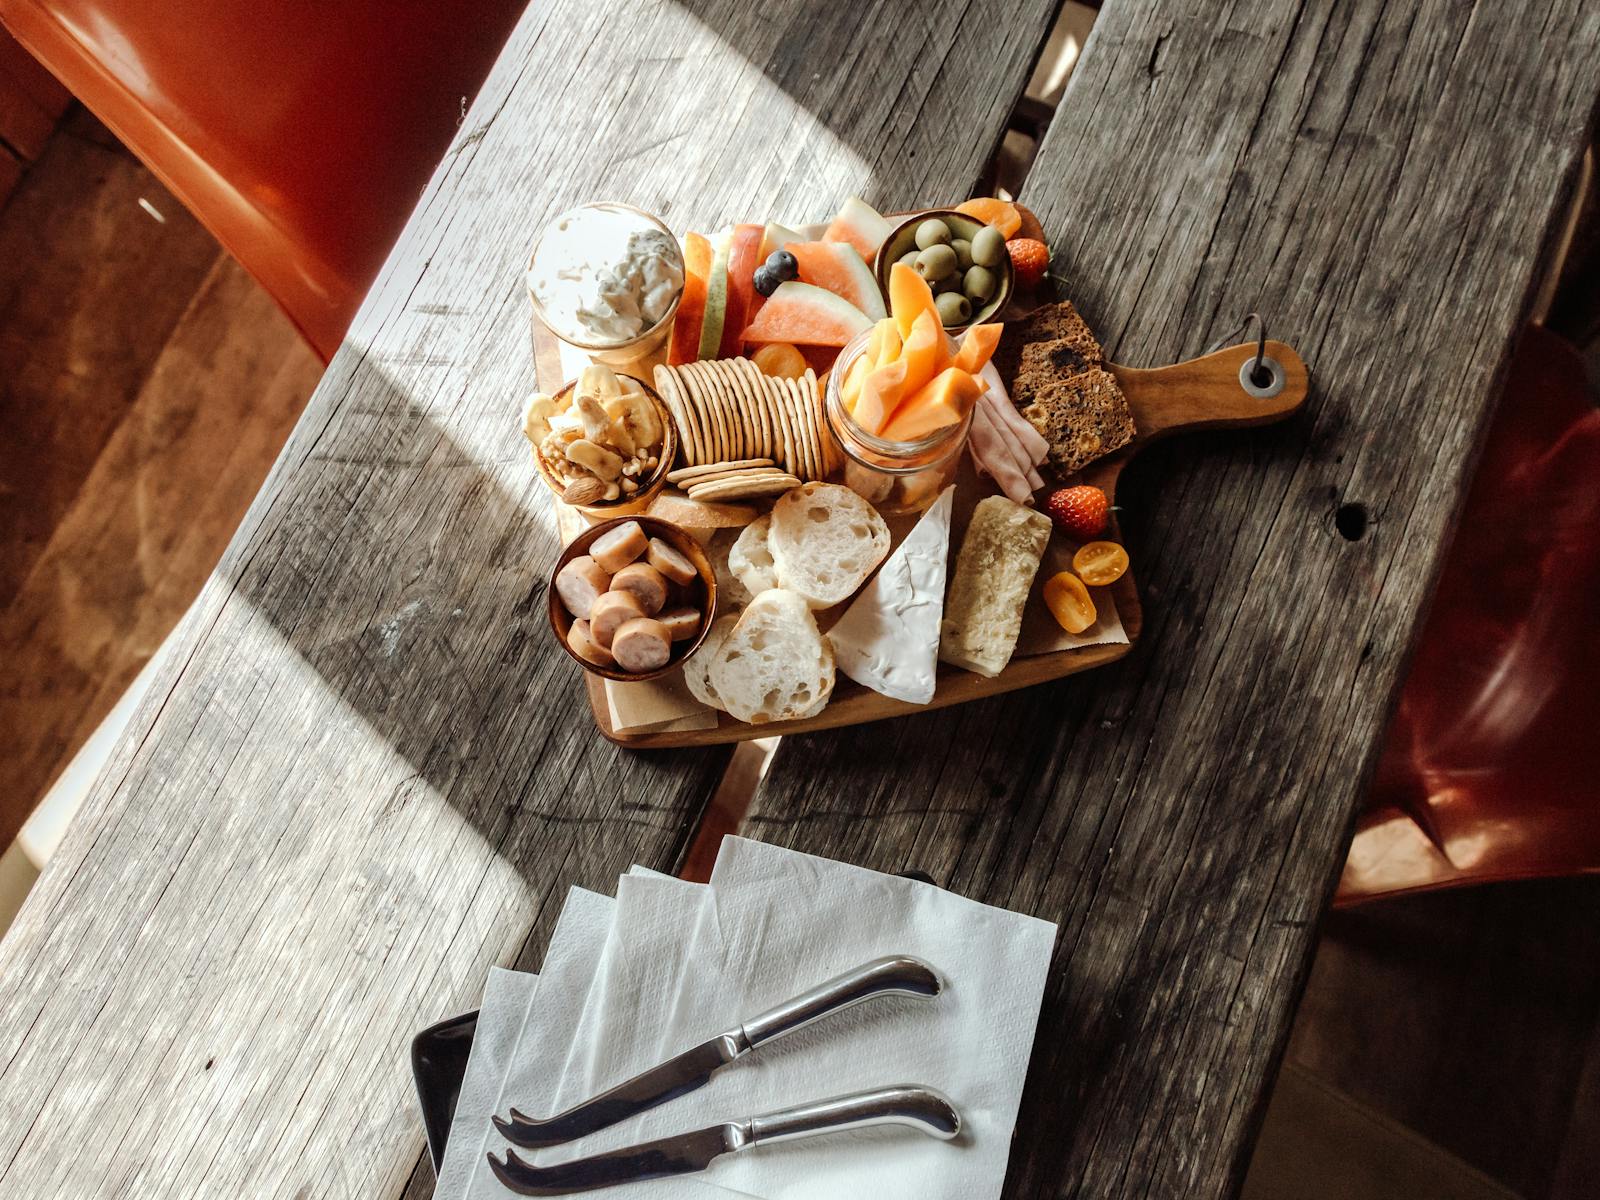 At this rustic venue you will enjoy a tasting platter of Tasmanian meats and cheese.